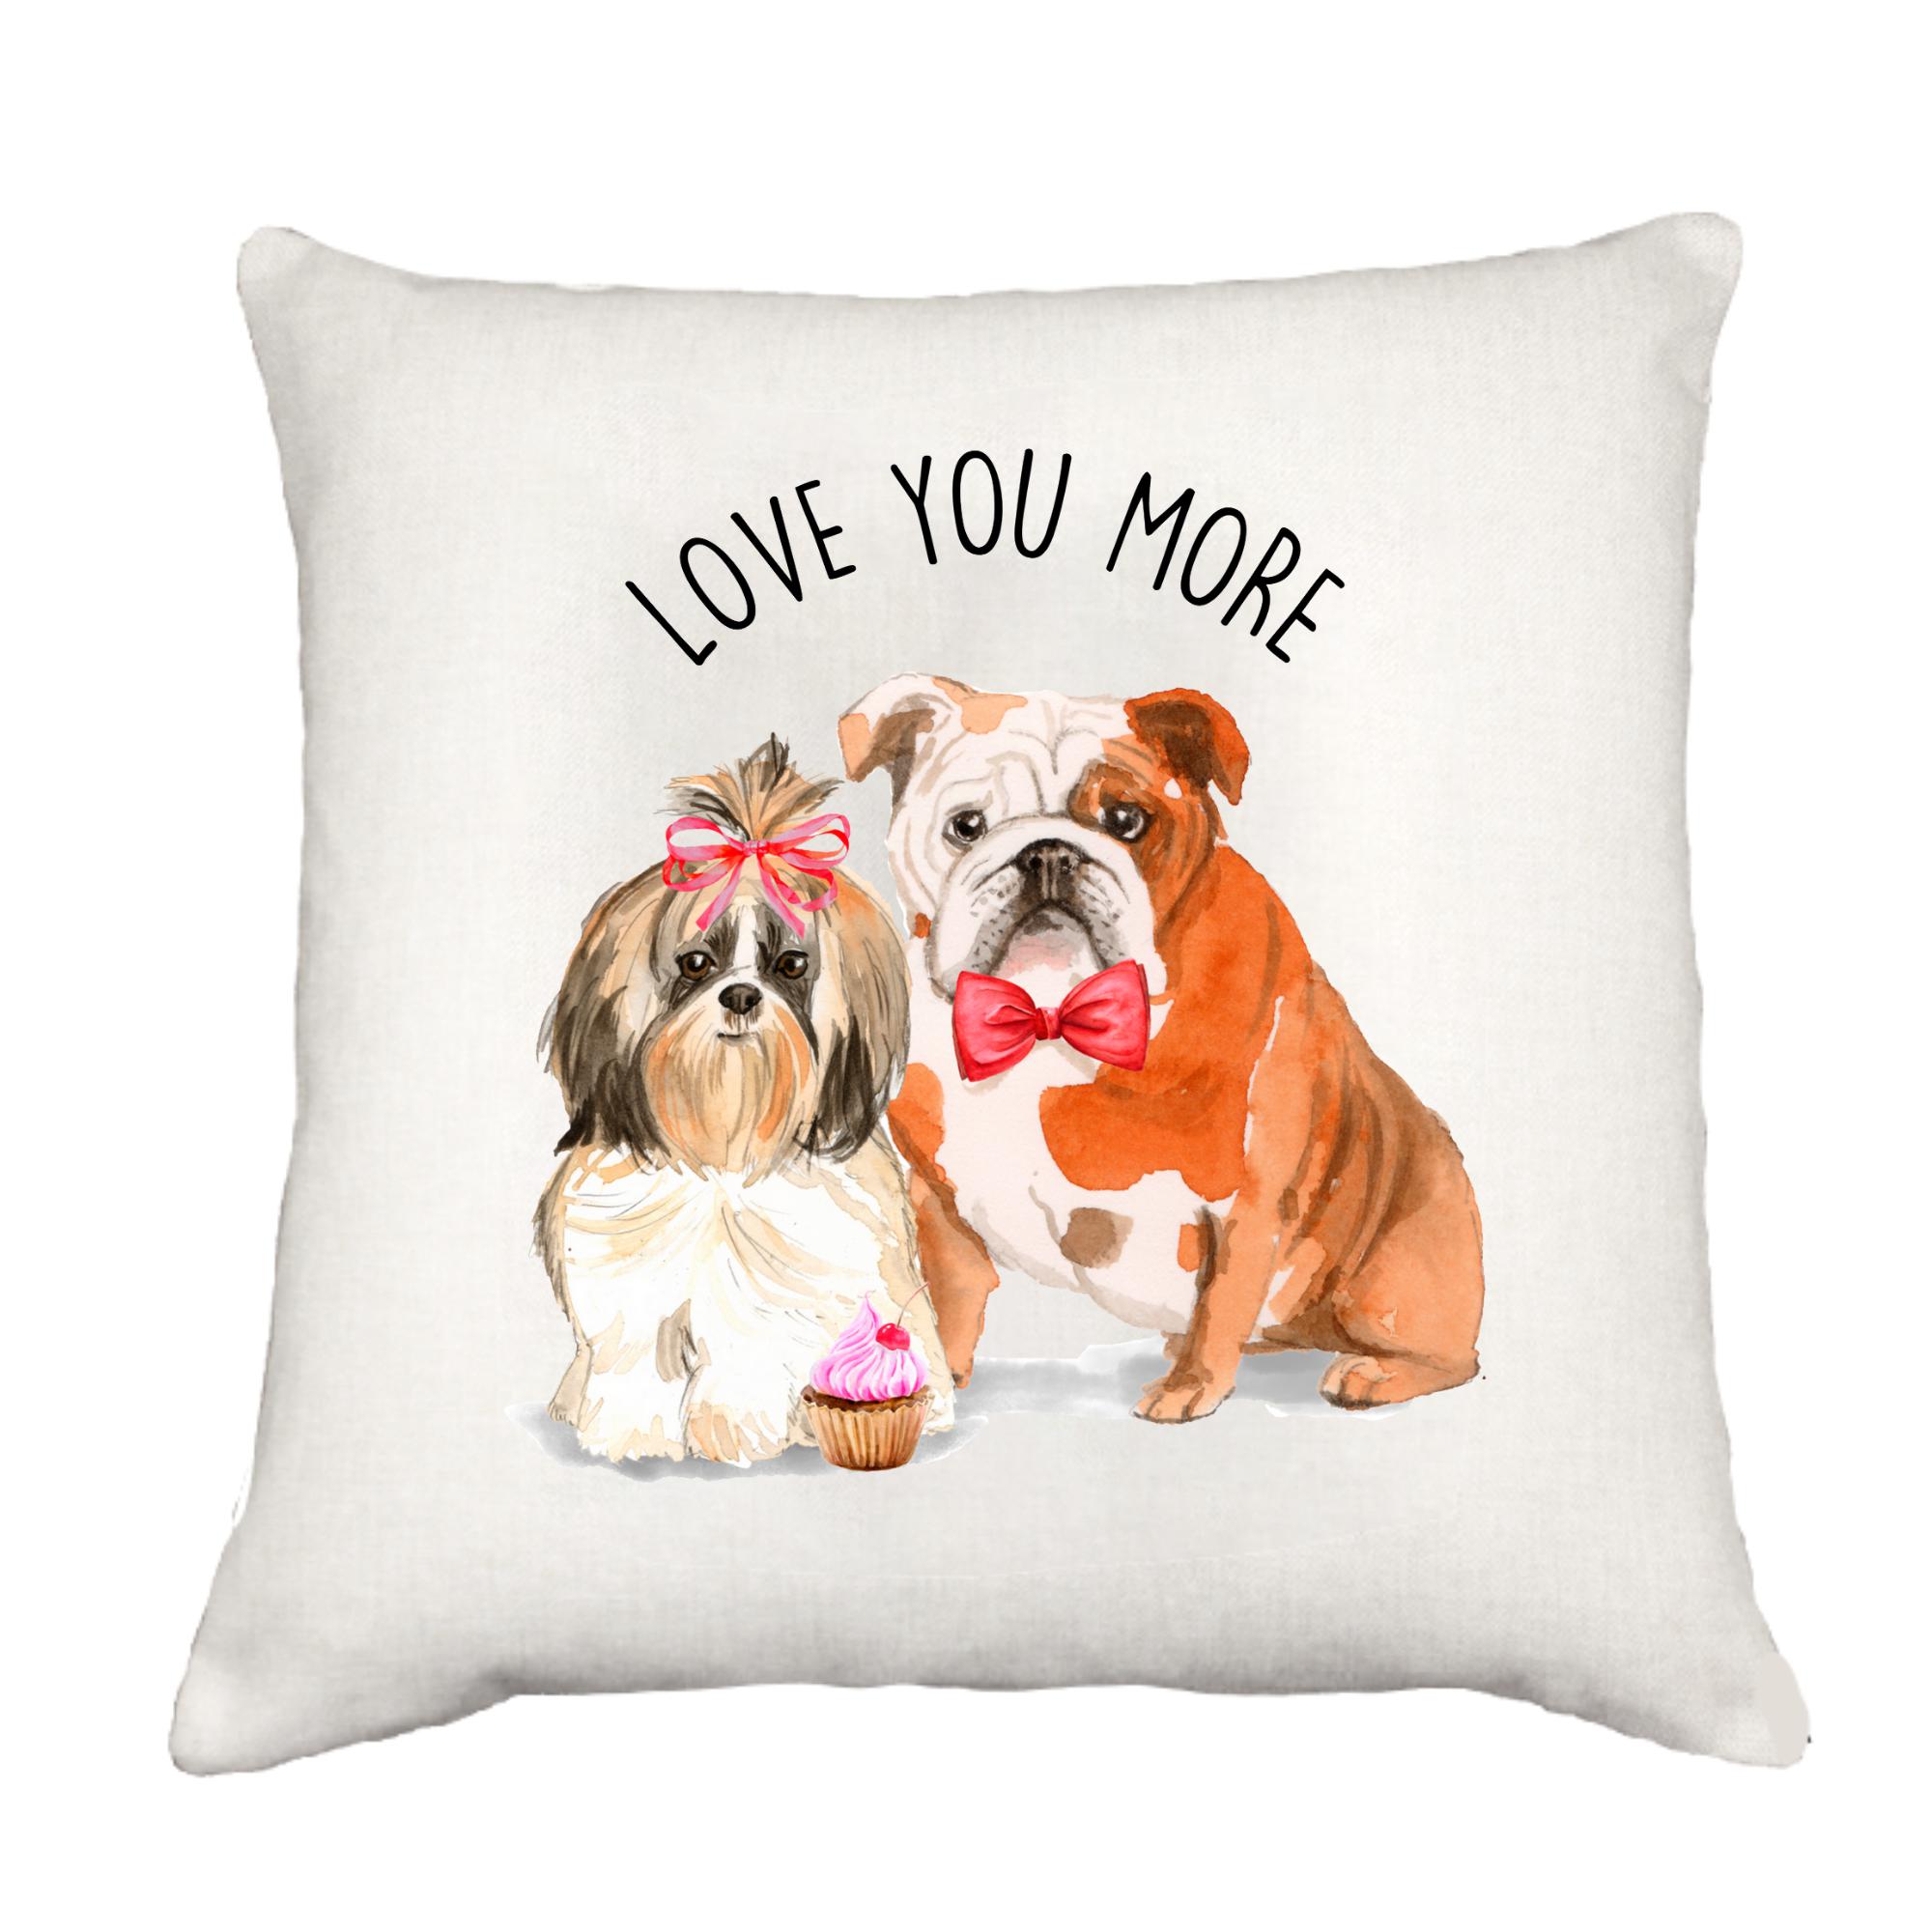 Love You More Dogs Cottage Pillow Throw/Decorative Pillow - Southern Sisters